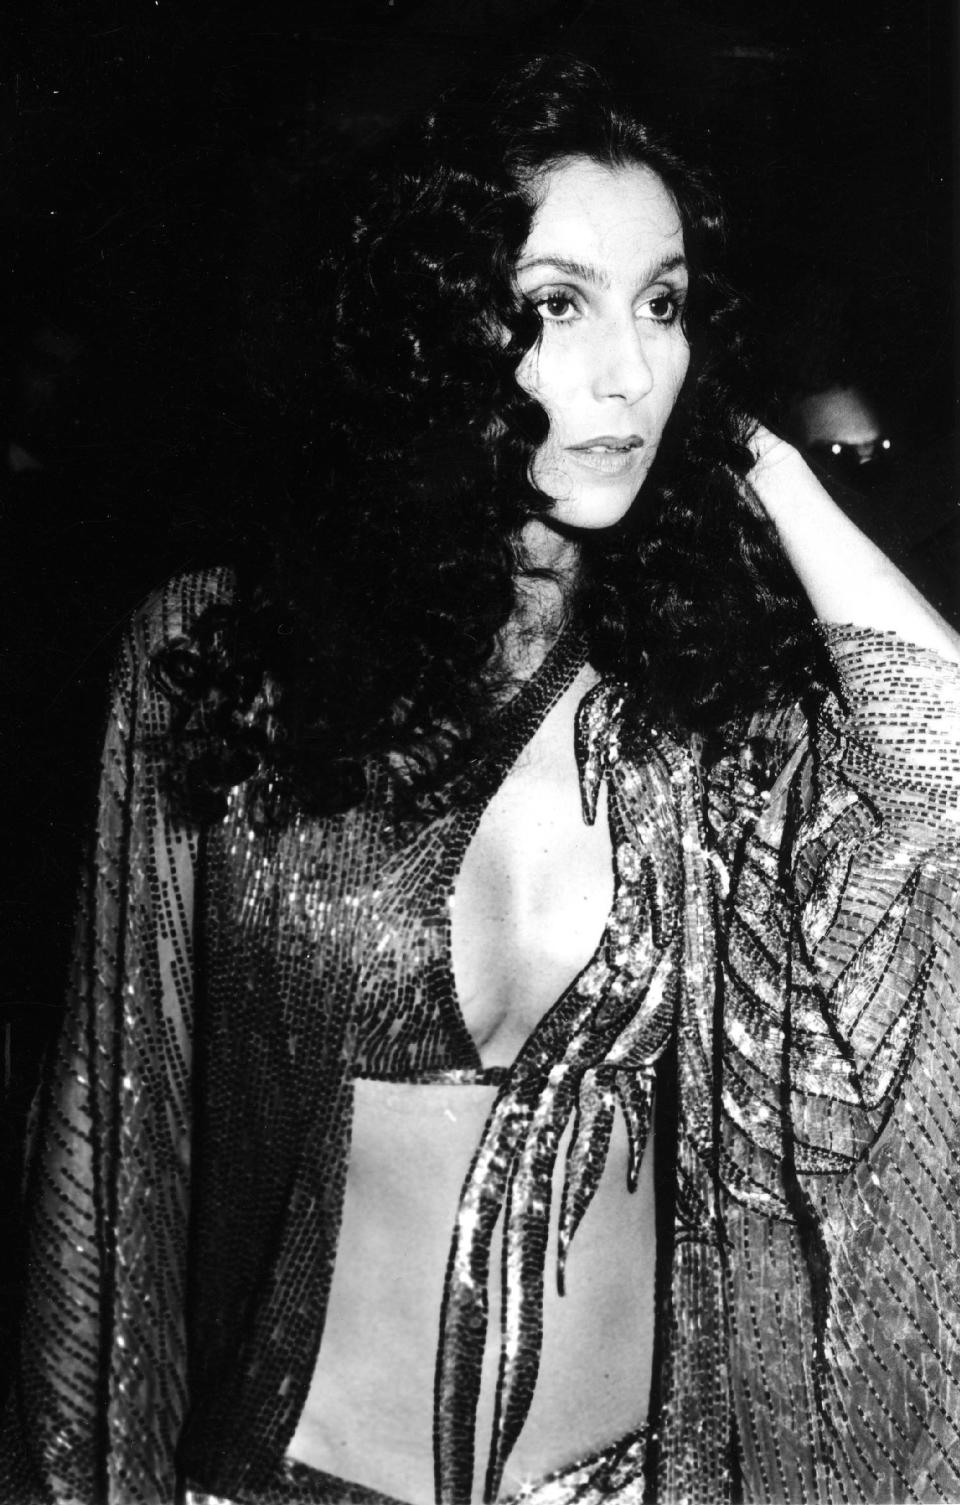 Happy birthday, Cher! Here's a look back at her most risk-taking beauty moments.